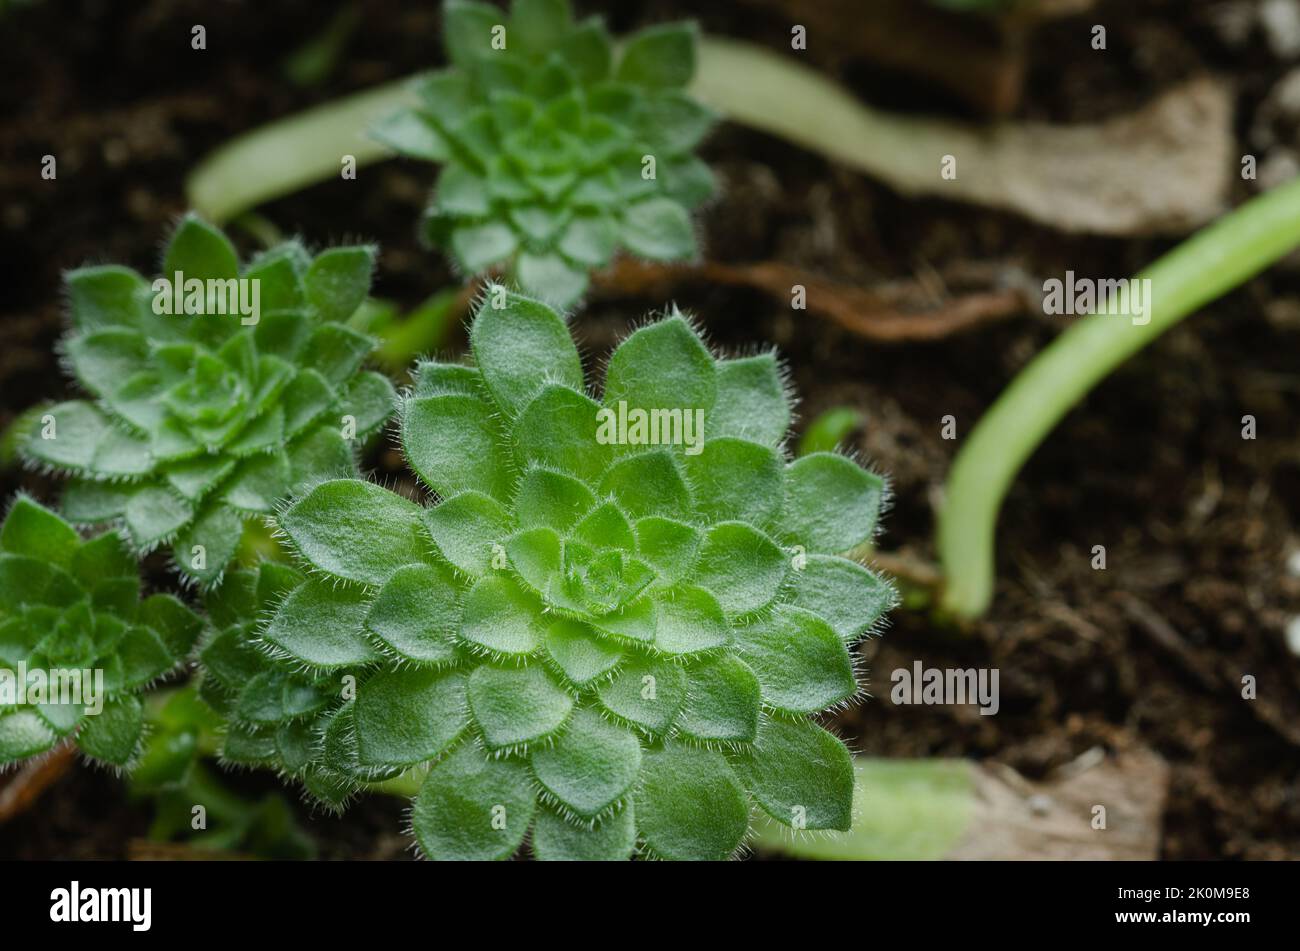 Nursery of small succulent plants propagated by leaves. Aeonium tabuliforme. Stock Photo